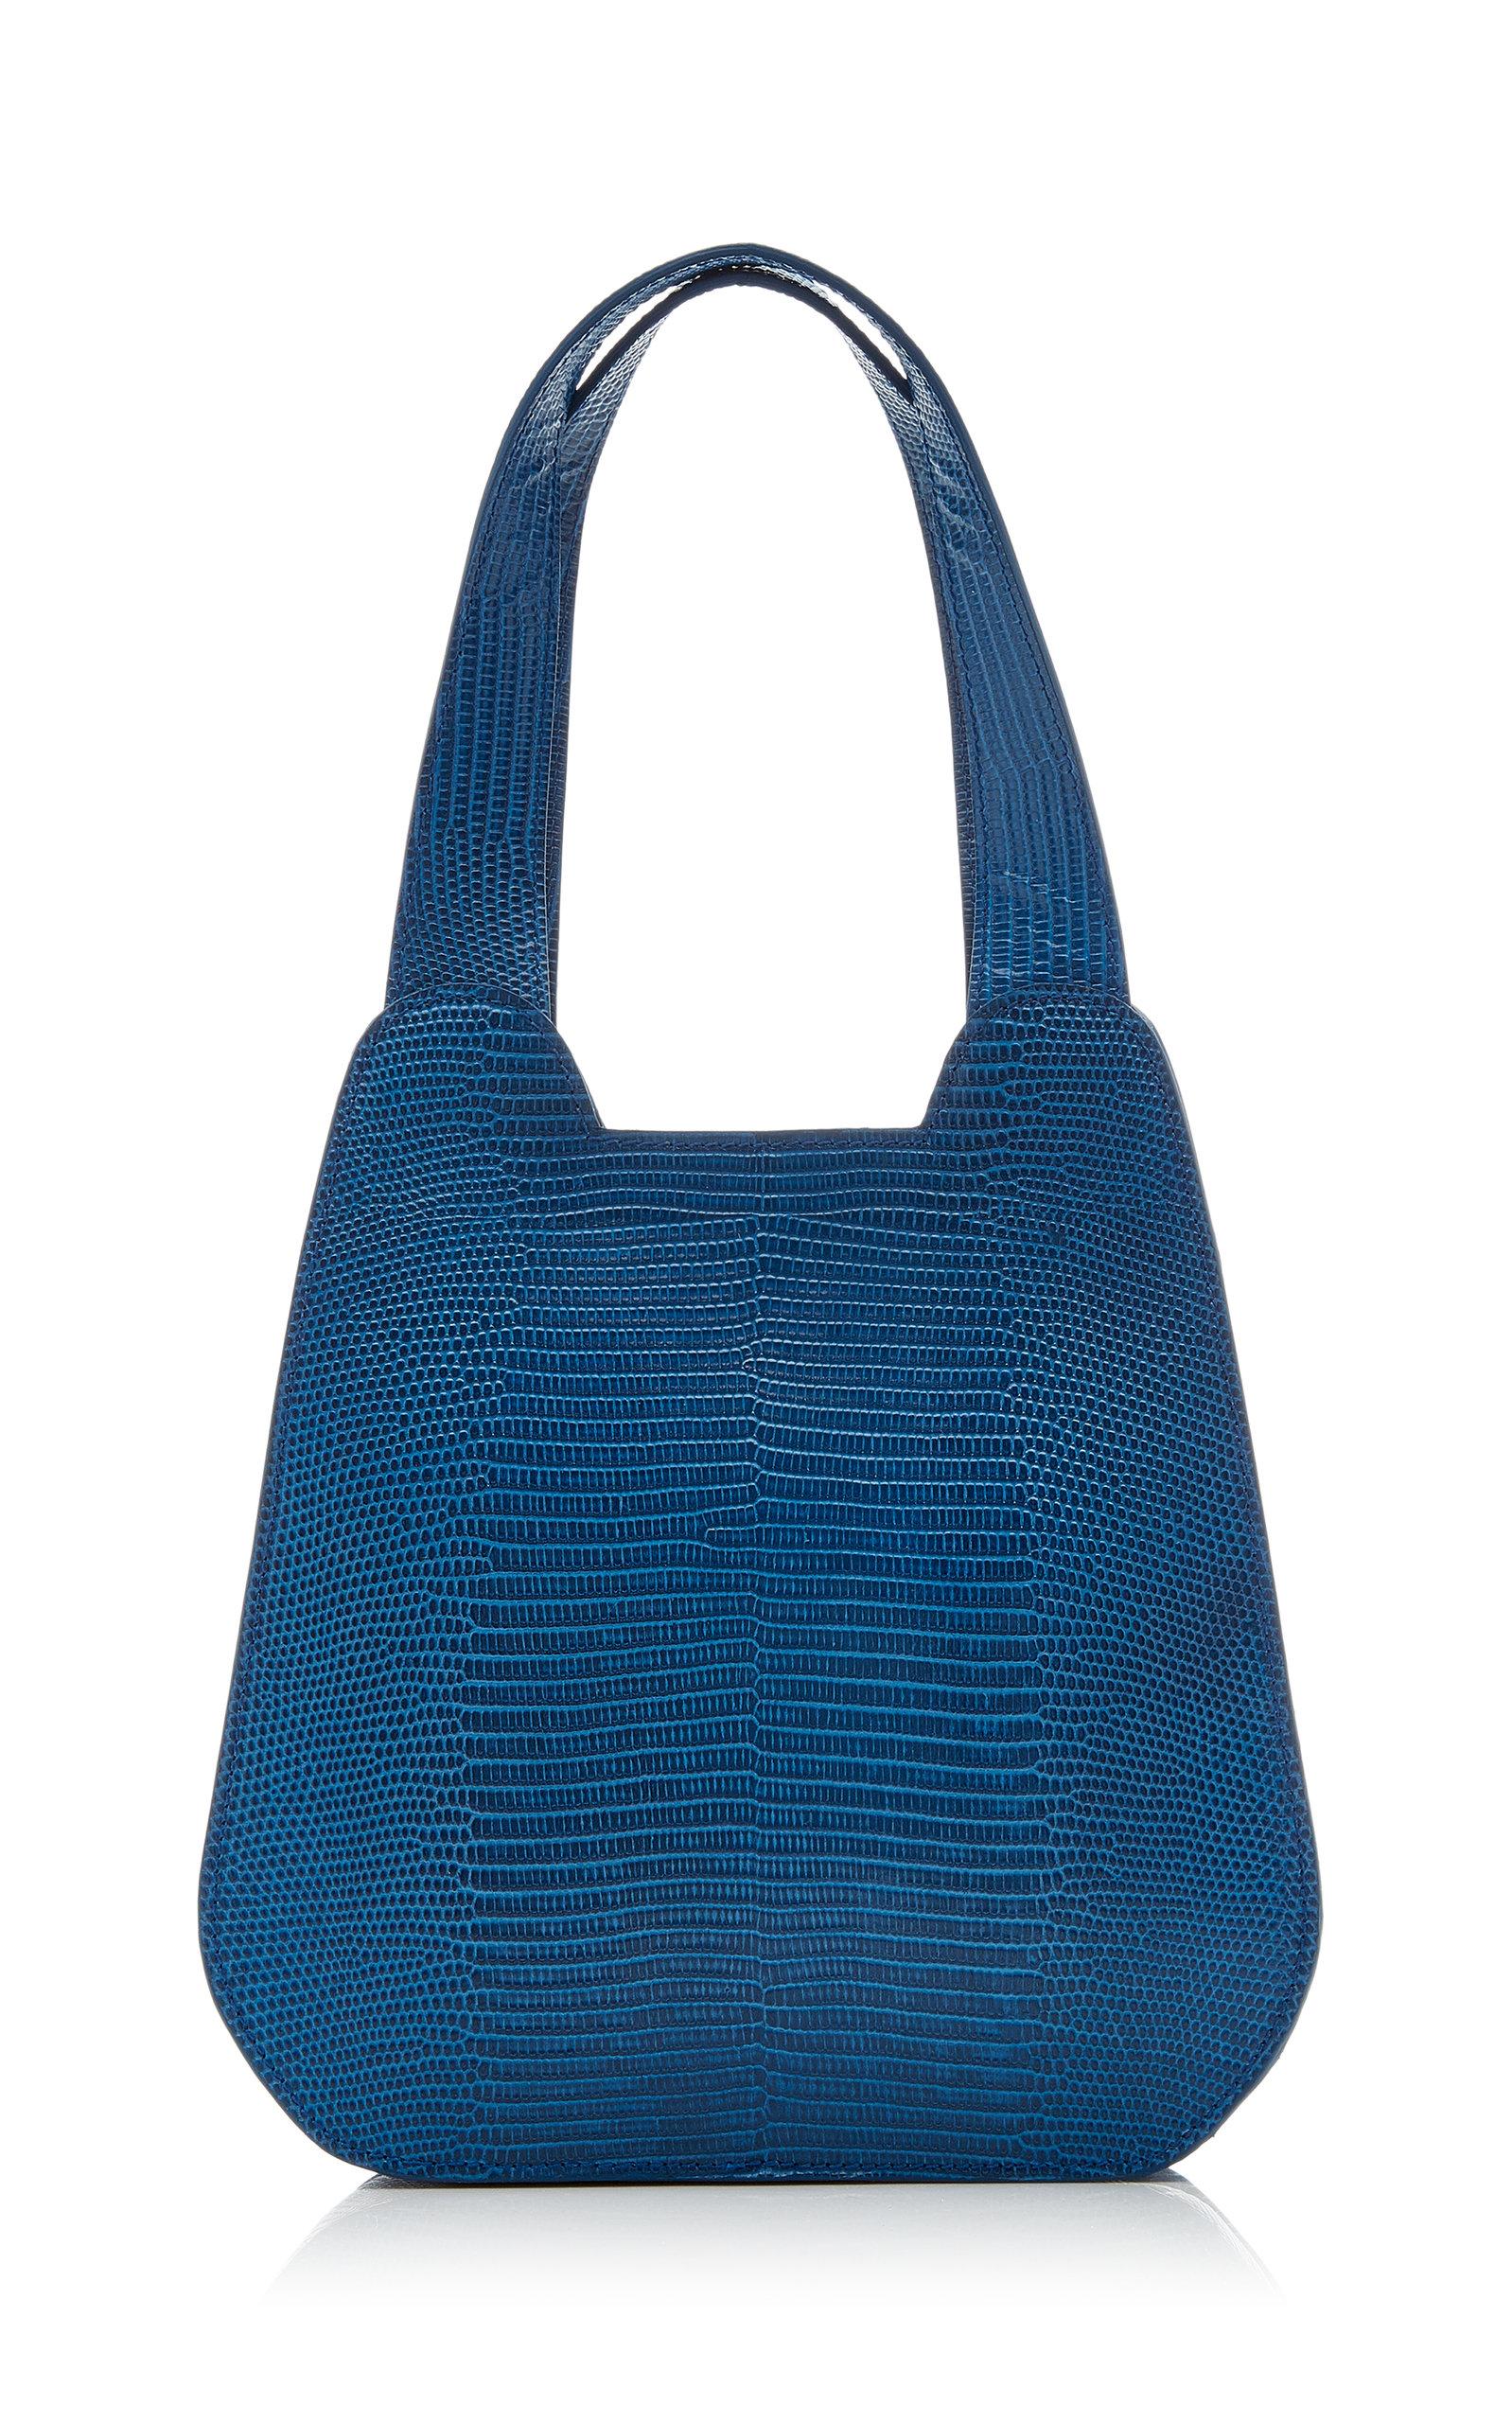 Tl-180 Anouk Lizard-effect Leather Tote in Turquoise (Blue 